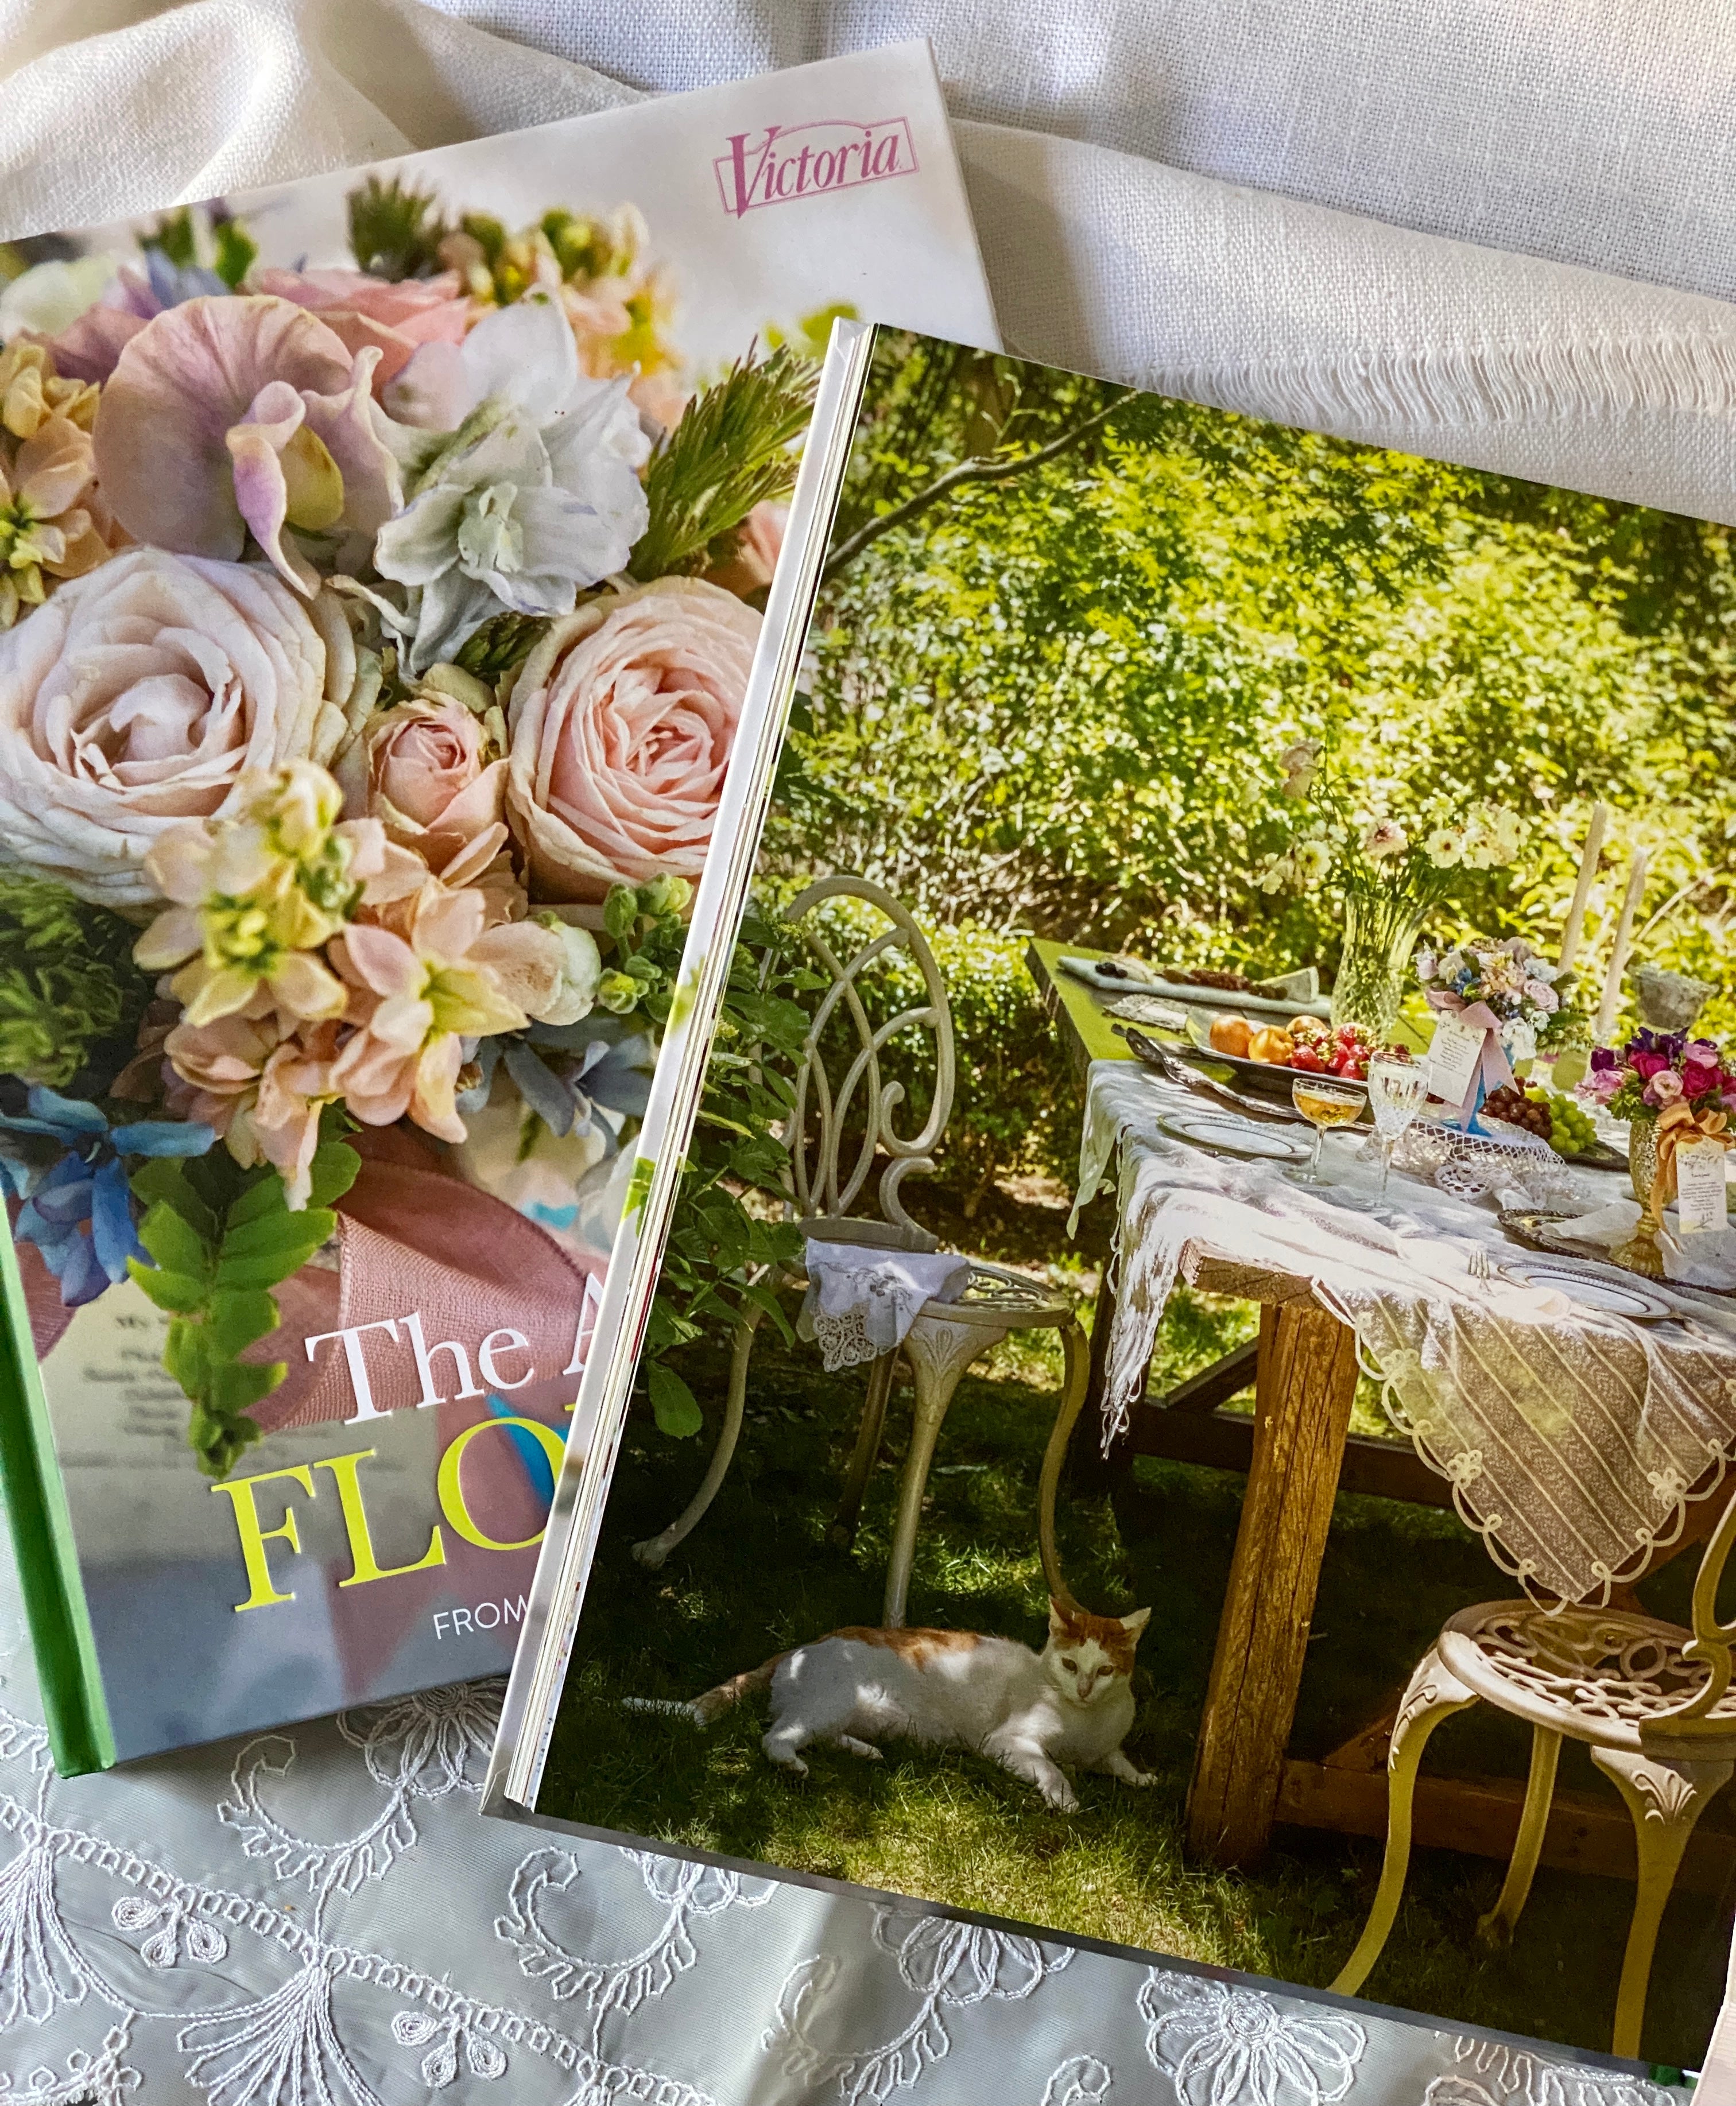 The Art of Flowers, by the editors of Victoria